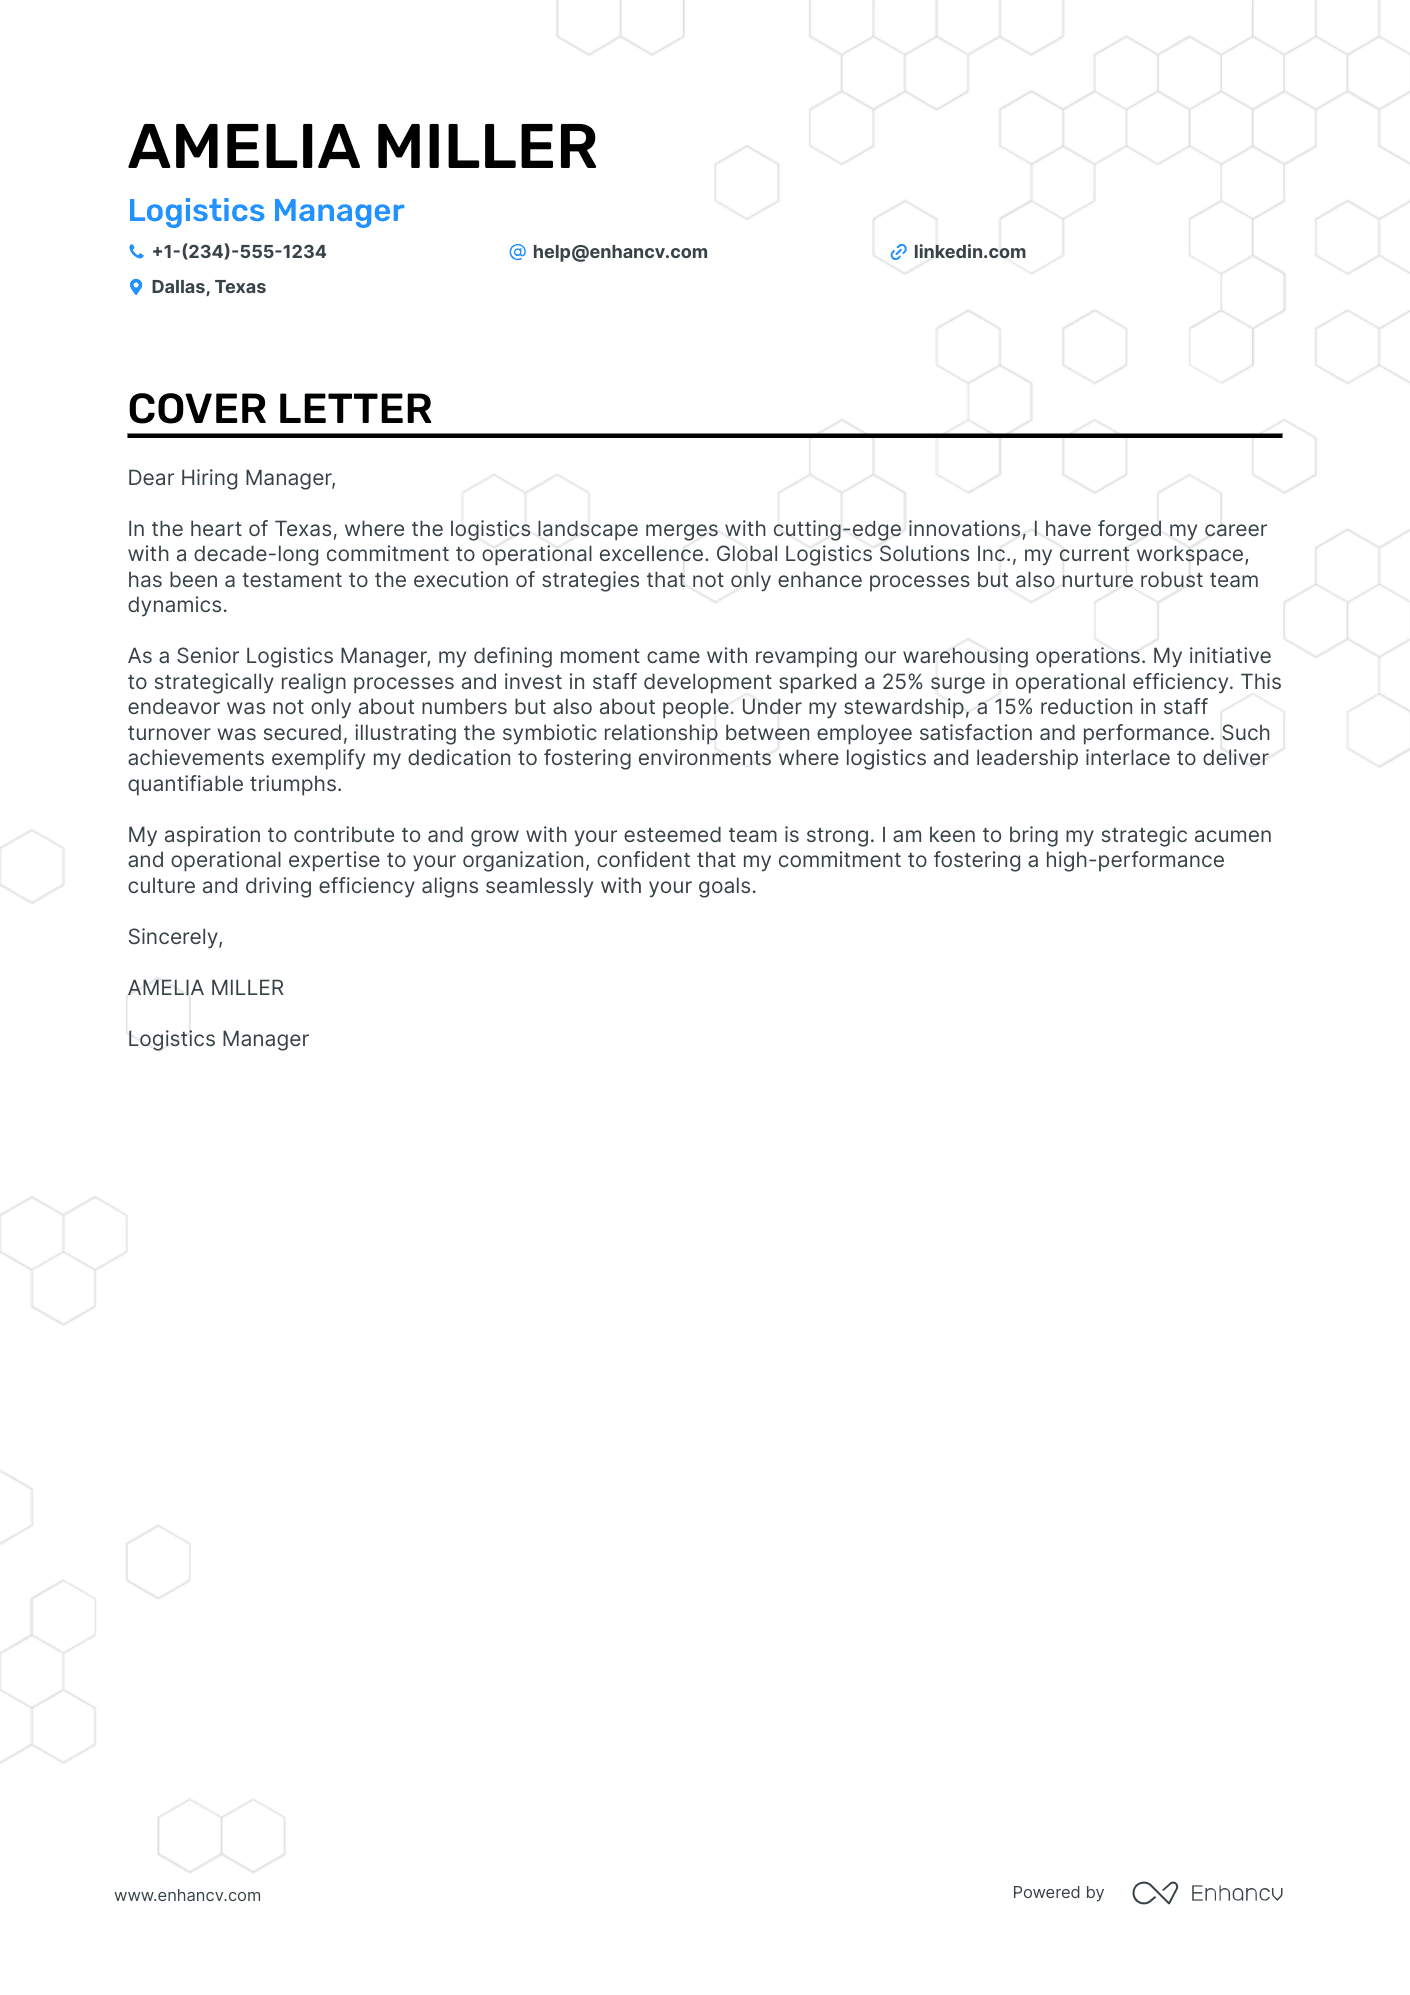 Logistic Manager cover letter